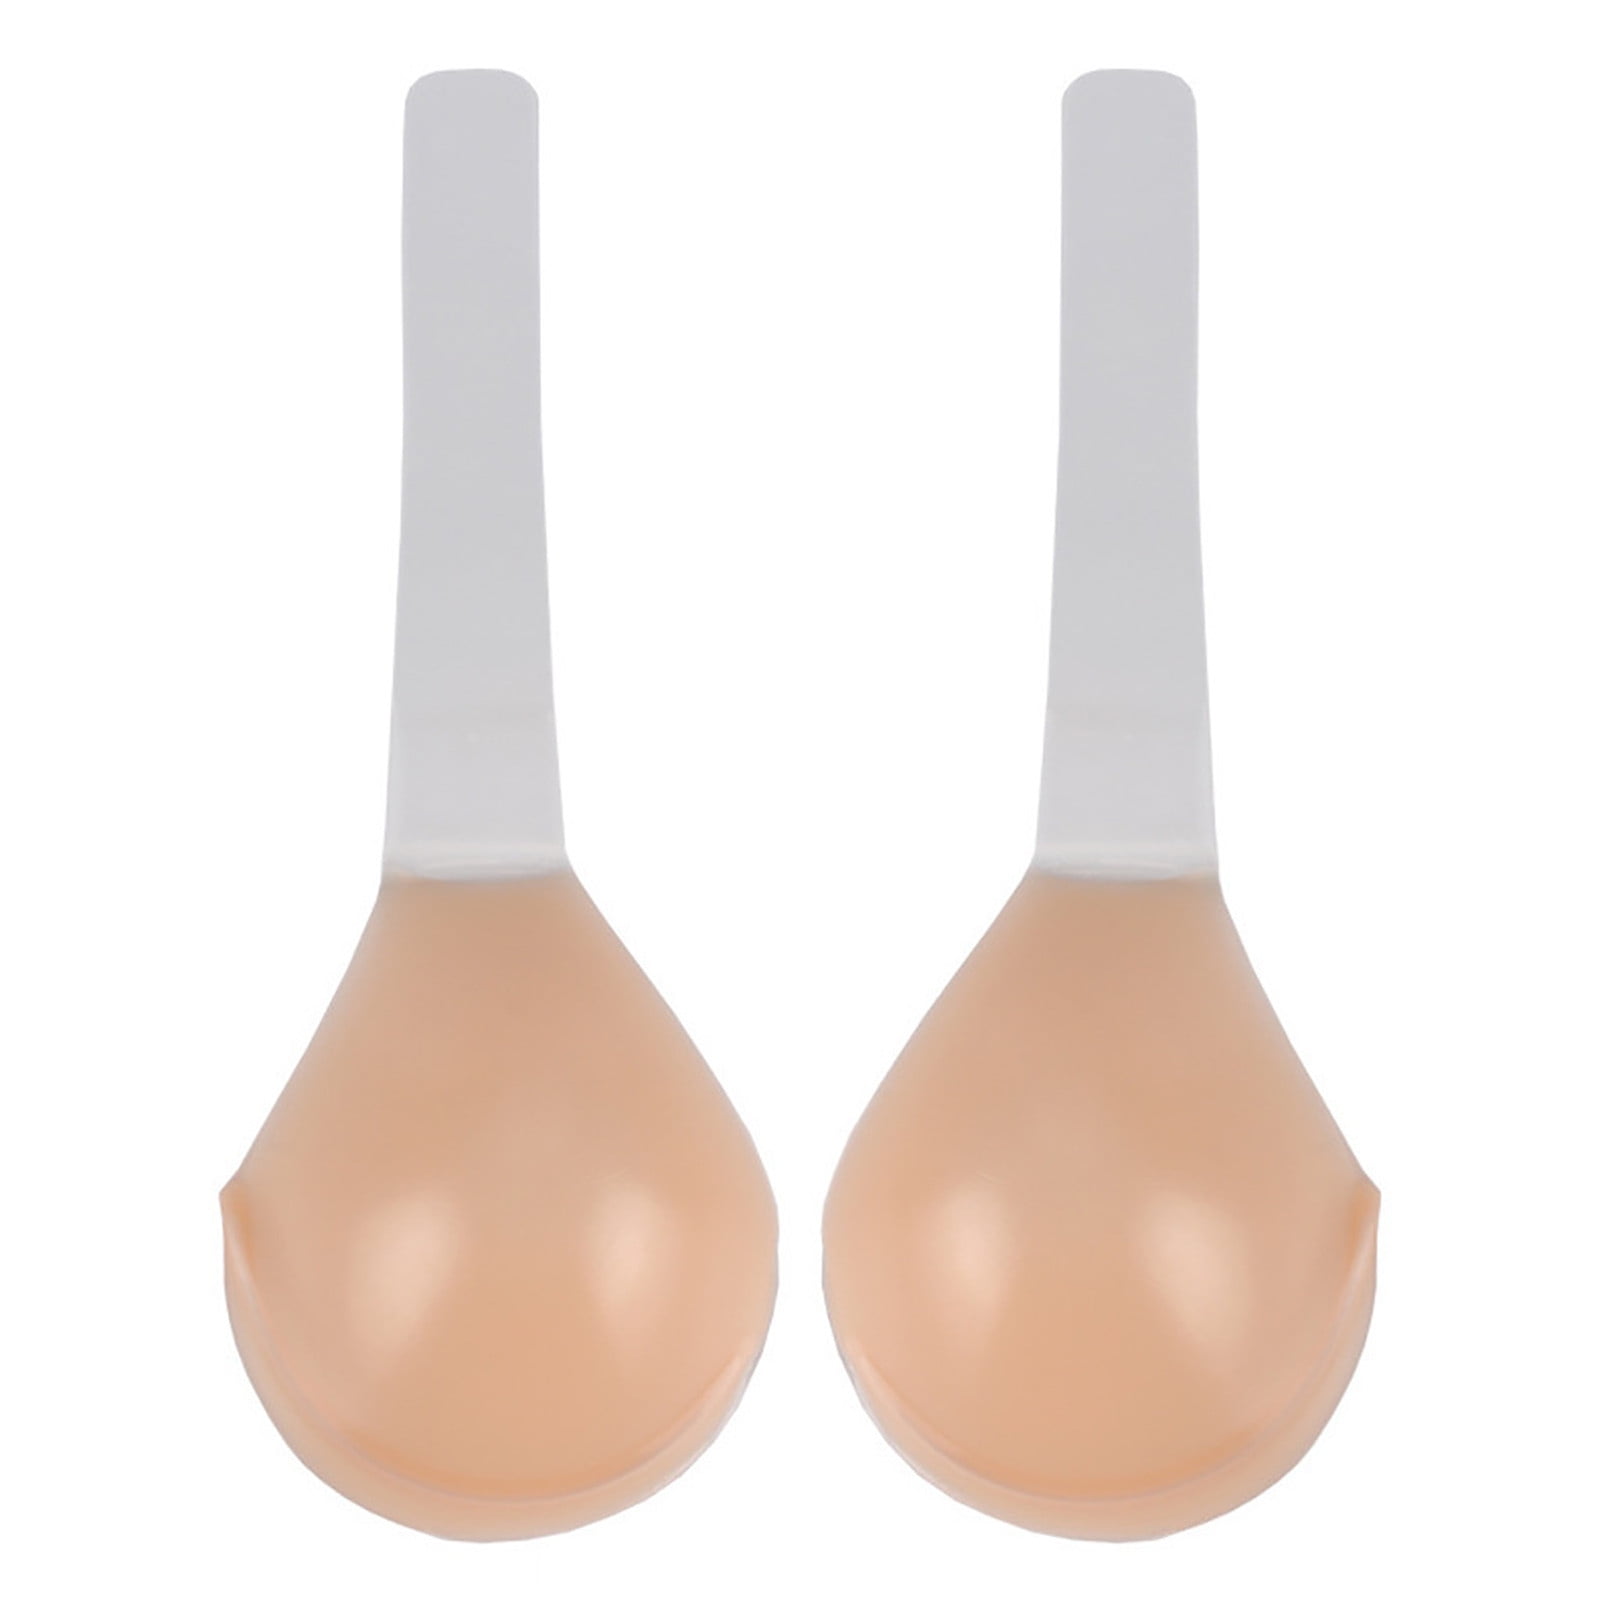 Alessandra B Mastectomy Bras with Pockets for Prosthesis Nude